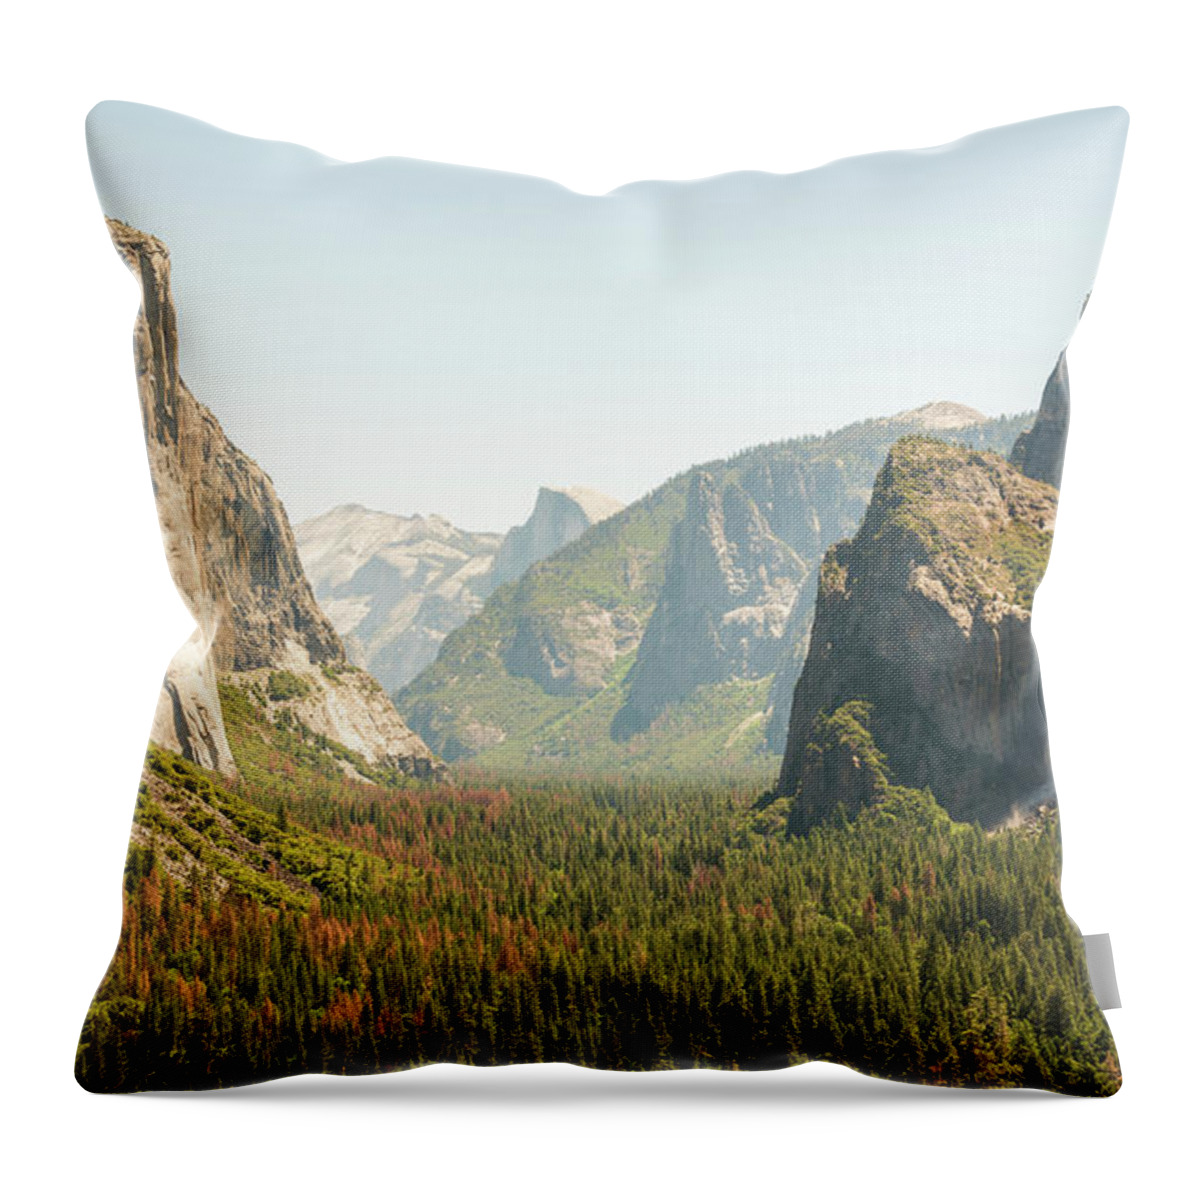 Yosemite Throw Pillow featuring the photograph Simple Valley by Kristopher Schoenleber